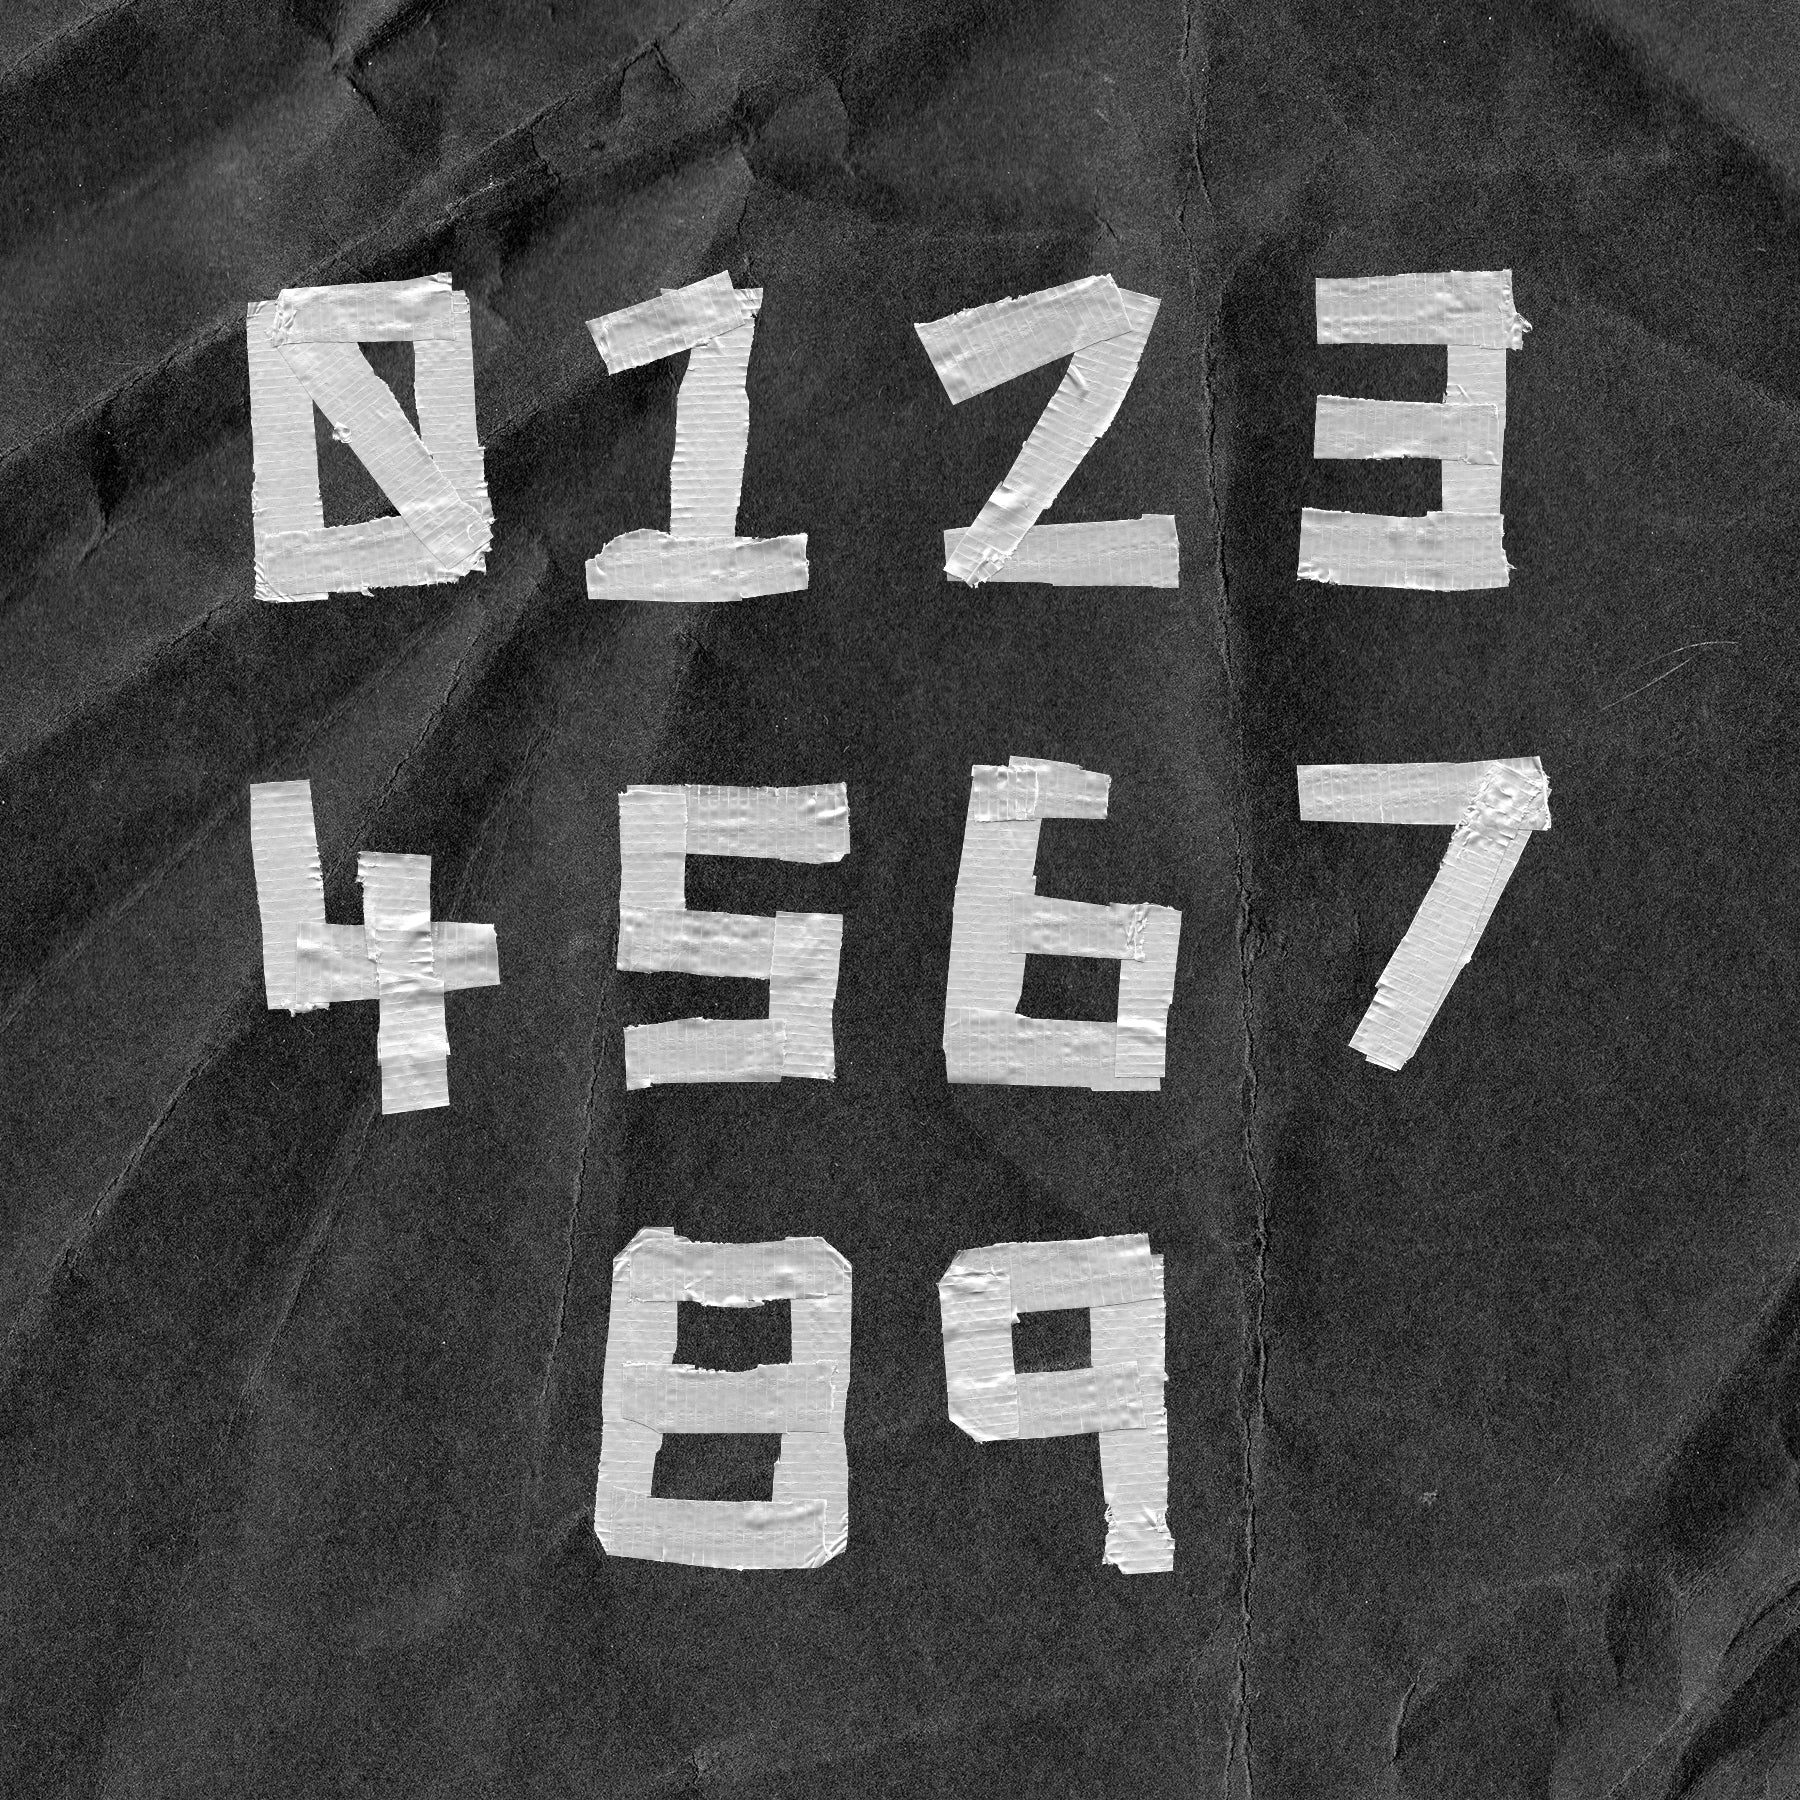 Text made out of duct tape on a textured background that reads "0123456789".